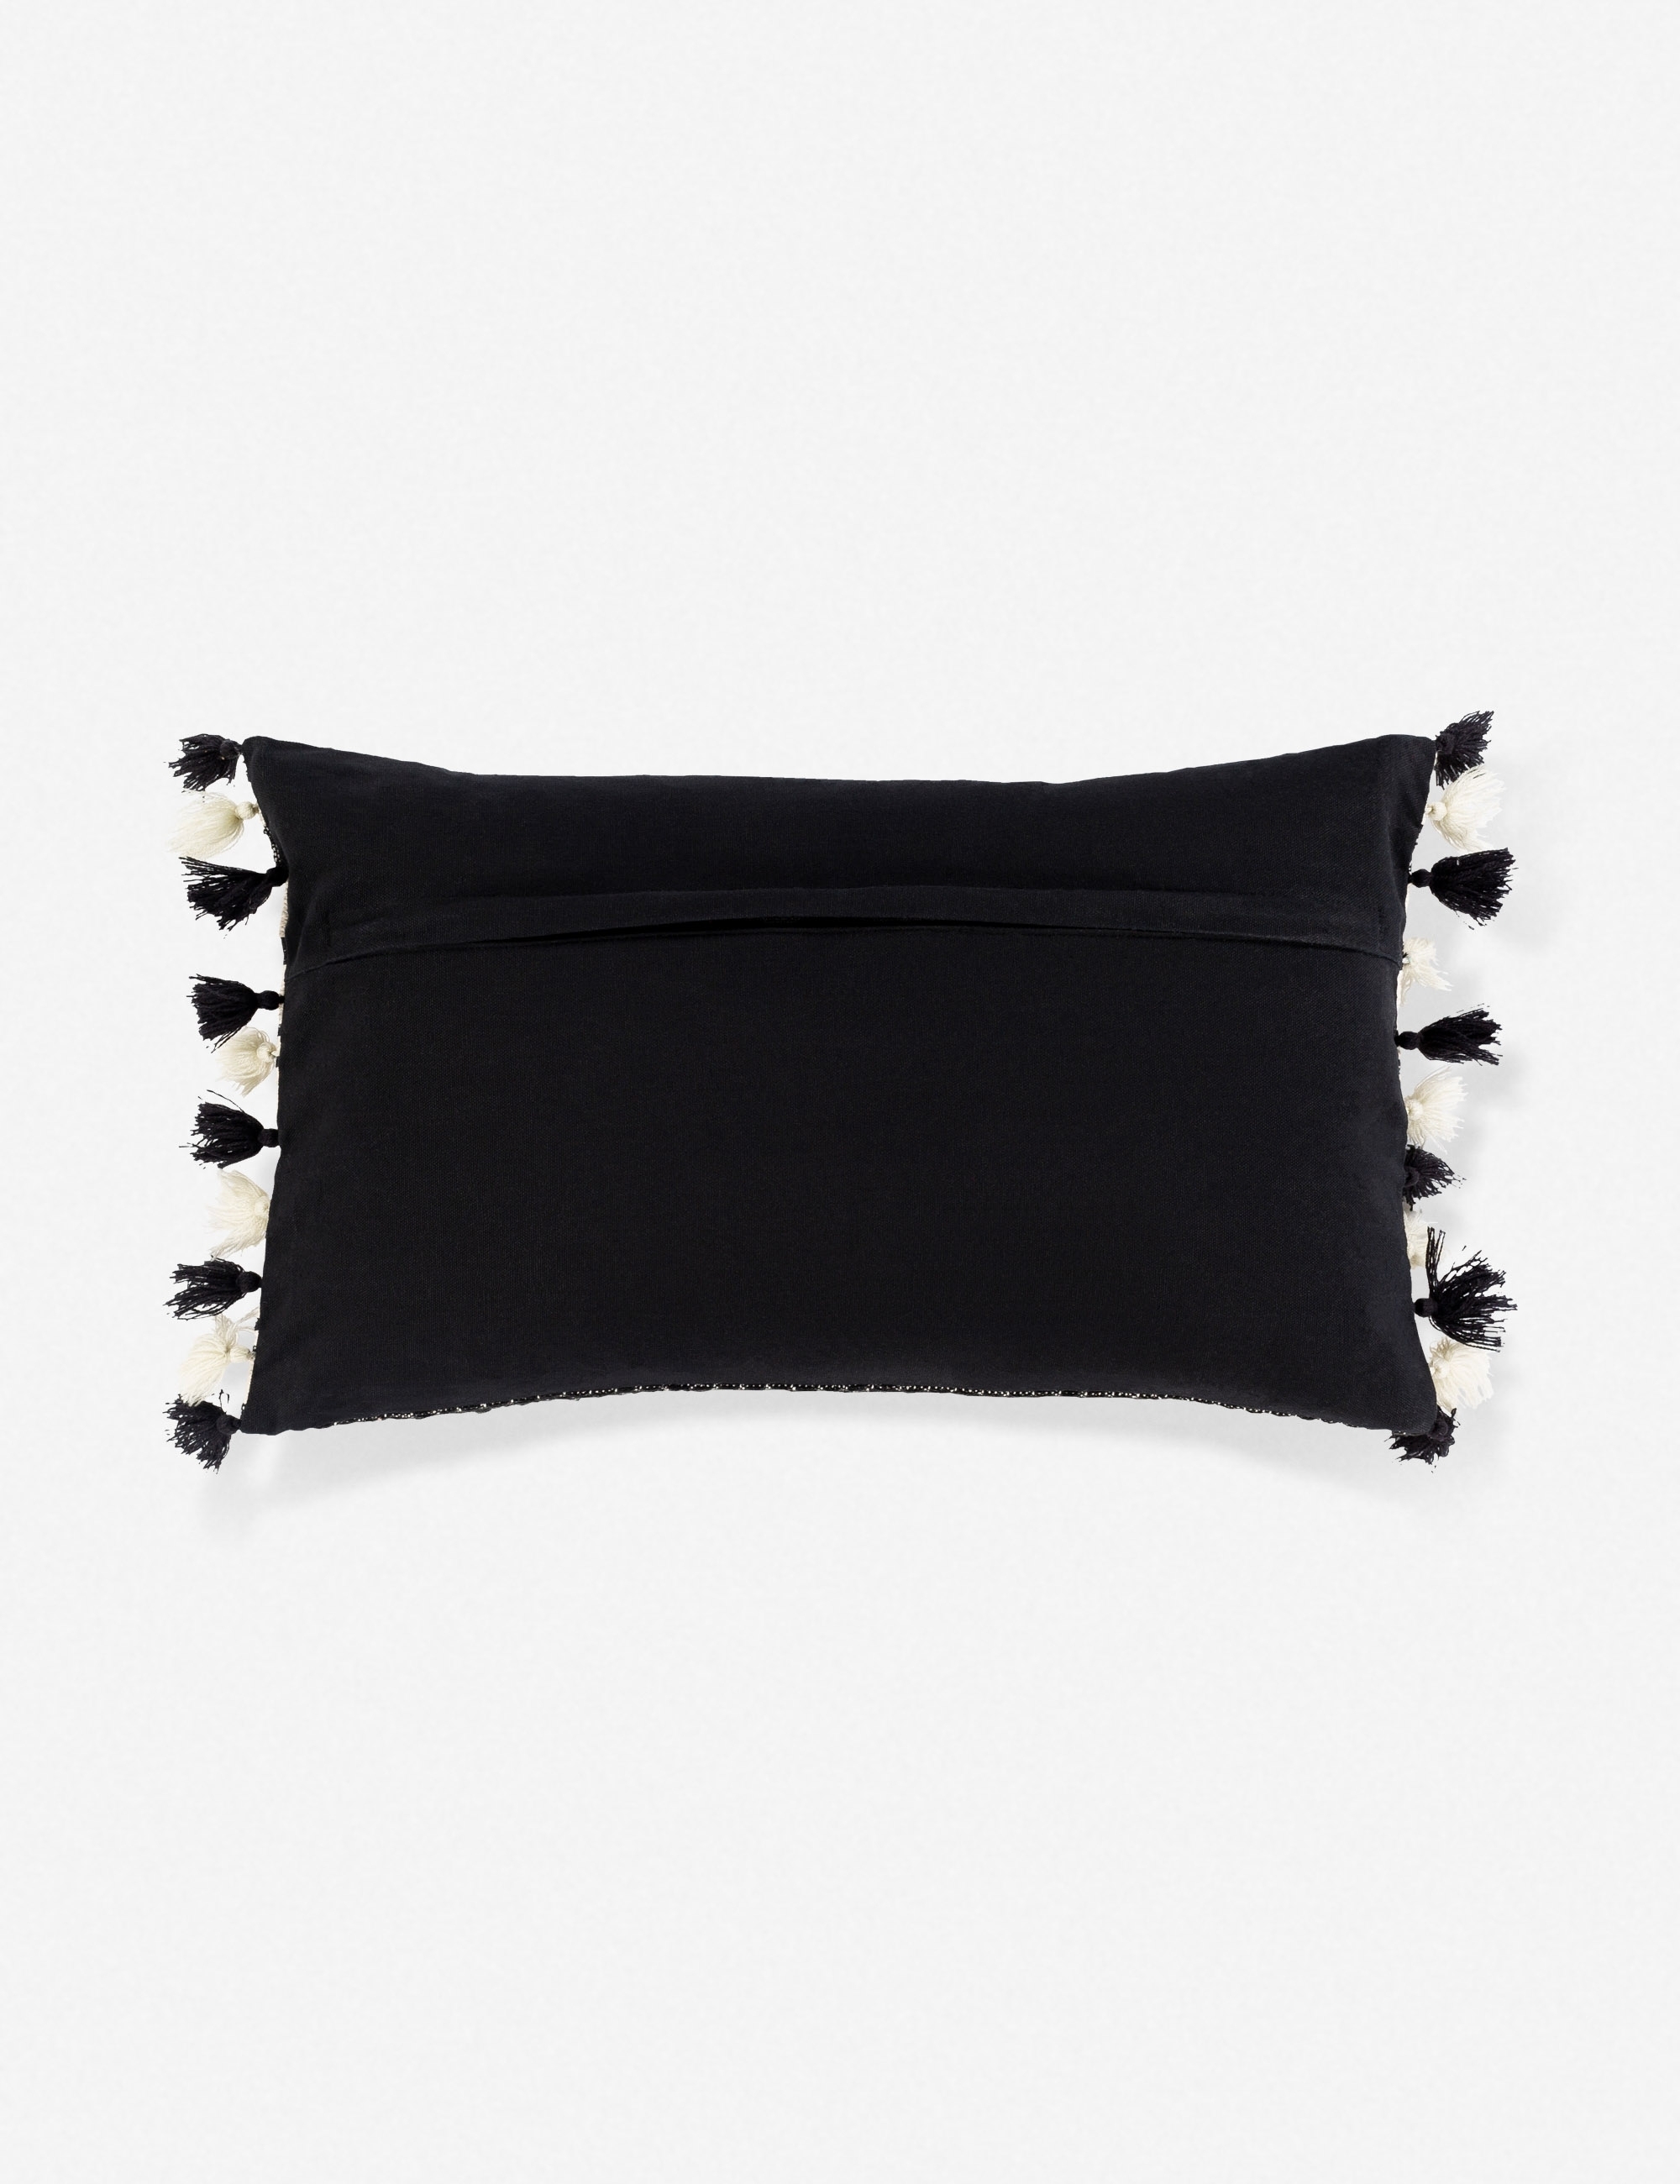 (DISCONTINUED) Margaux Lumbar Pillow, Cream and Black - Image 1